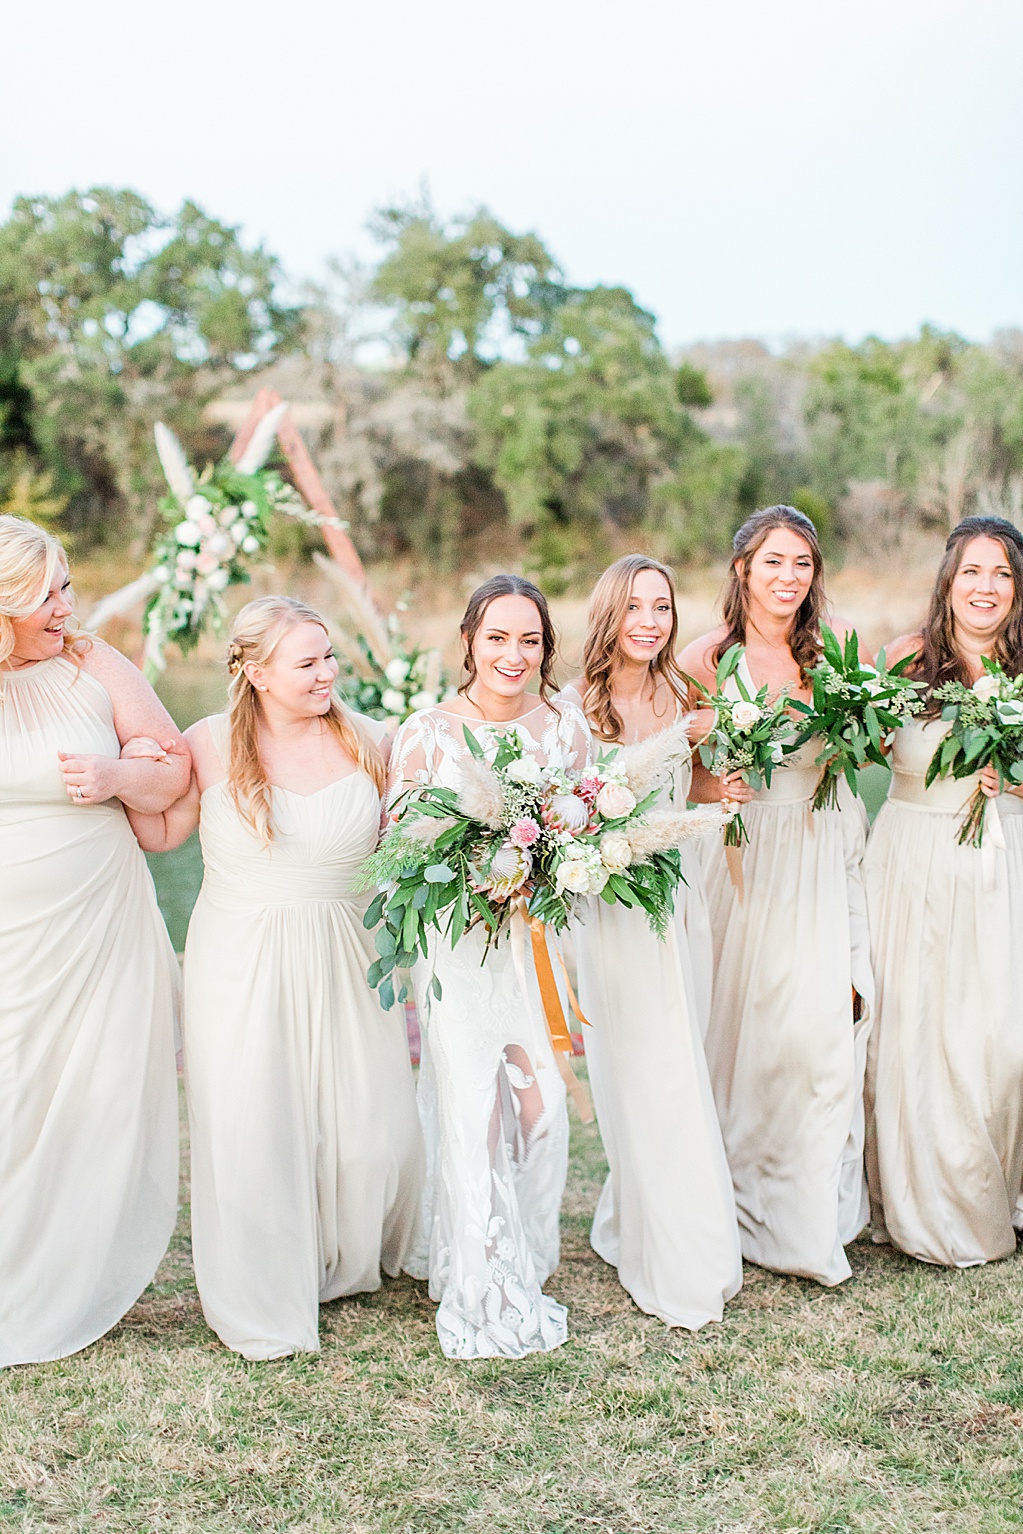 Hill Country Wedding at Turtle Creek Olive Grove wedding venue in Kerrville Texas by Wedding Photographer Allison Jeffers 0122